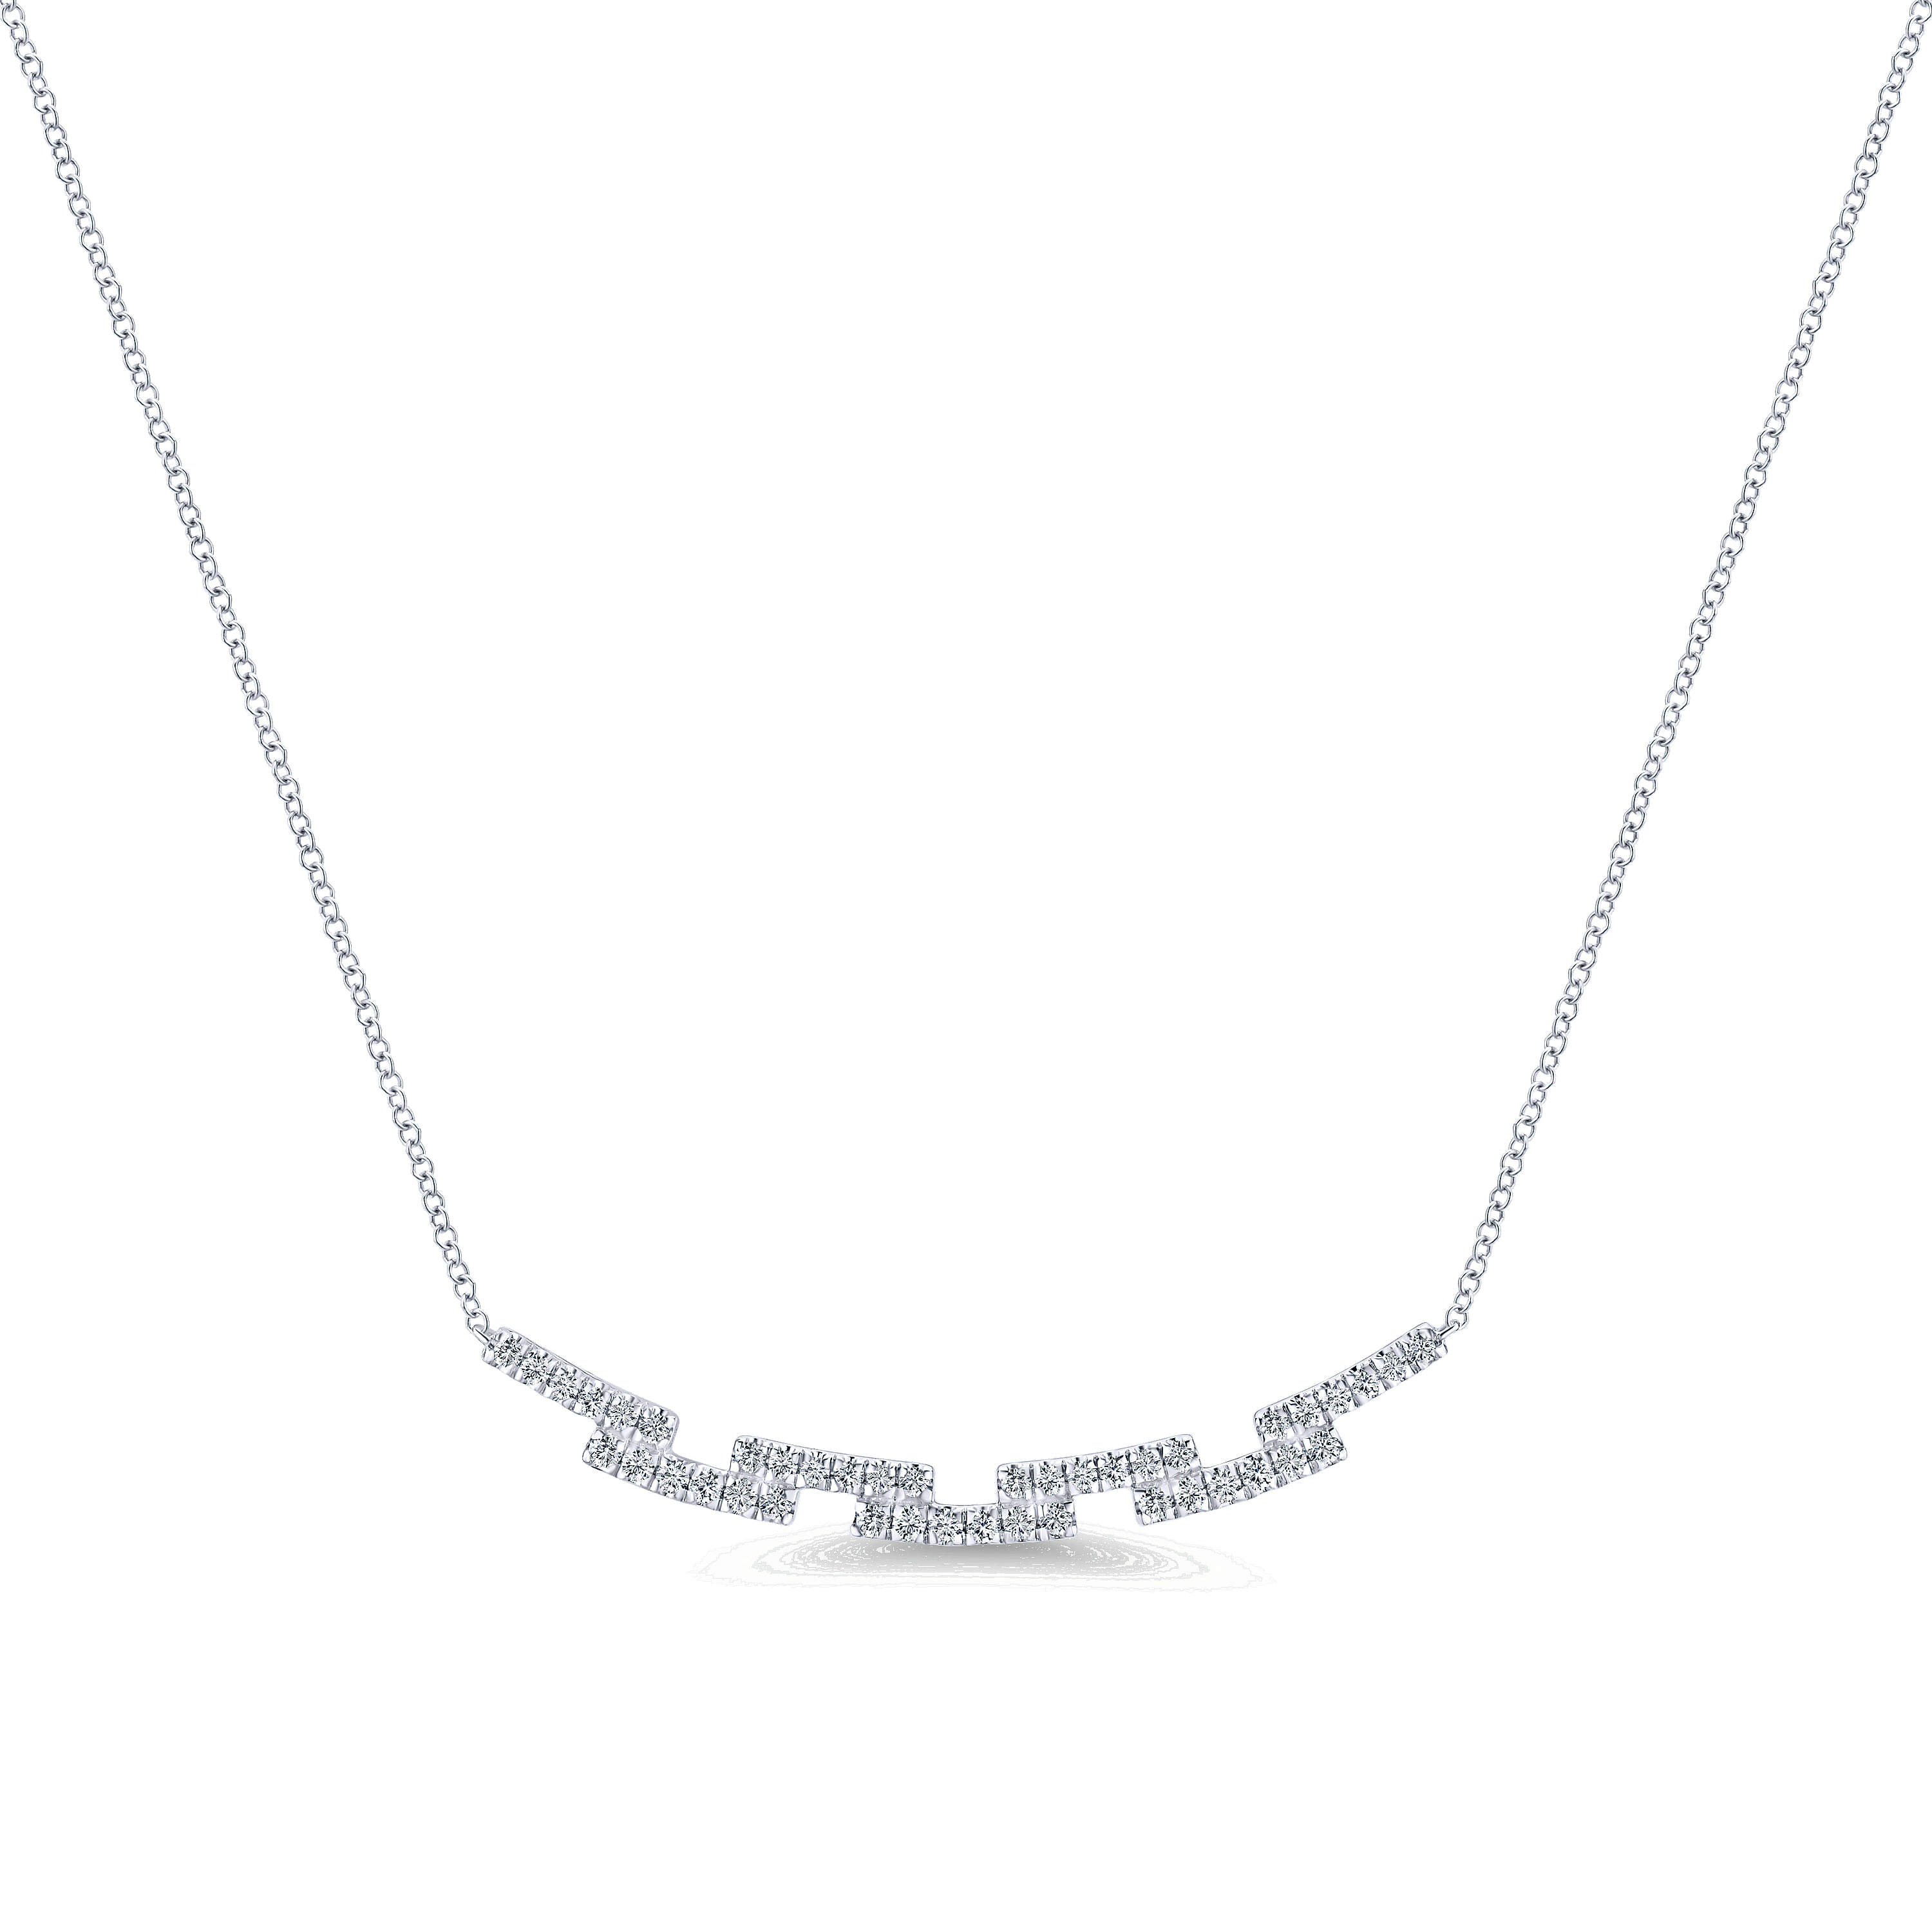 14K White Gold Segmented Curved Diamond Bar Necklace